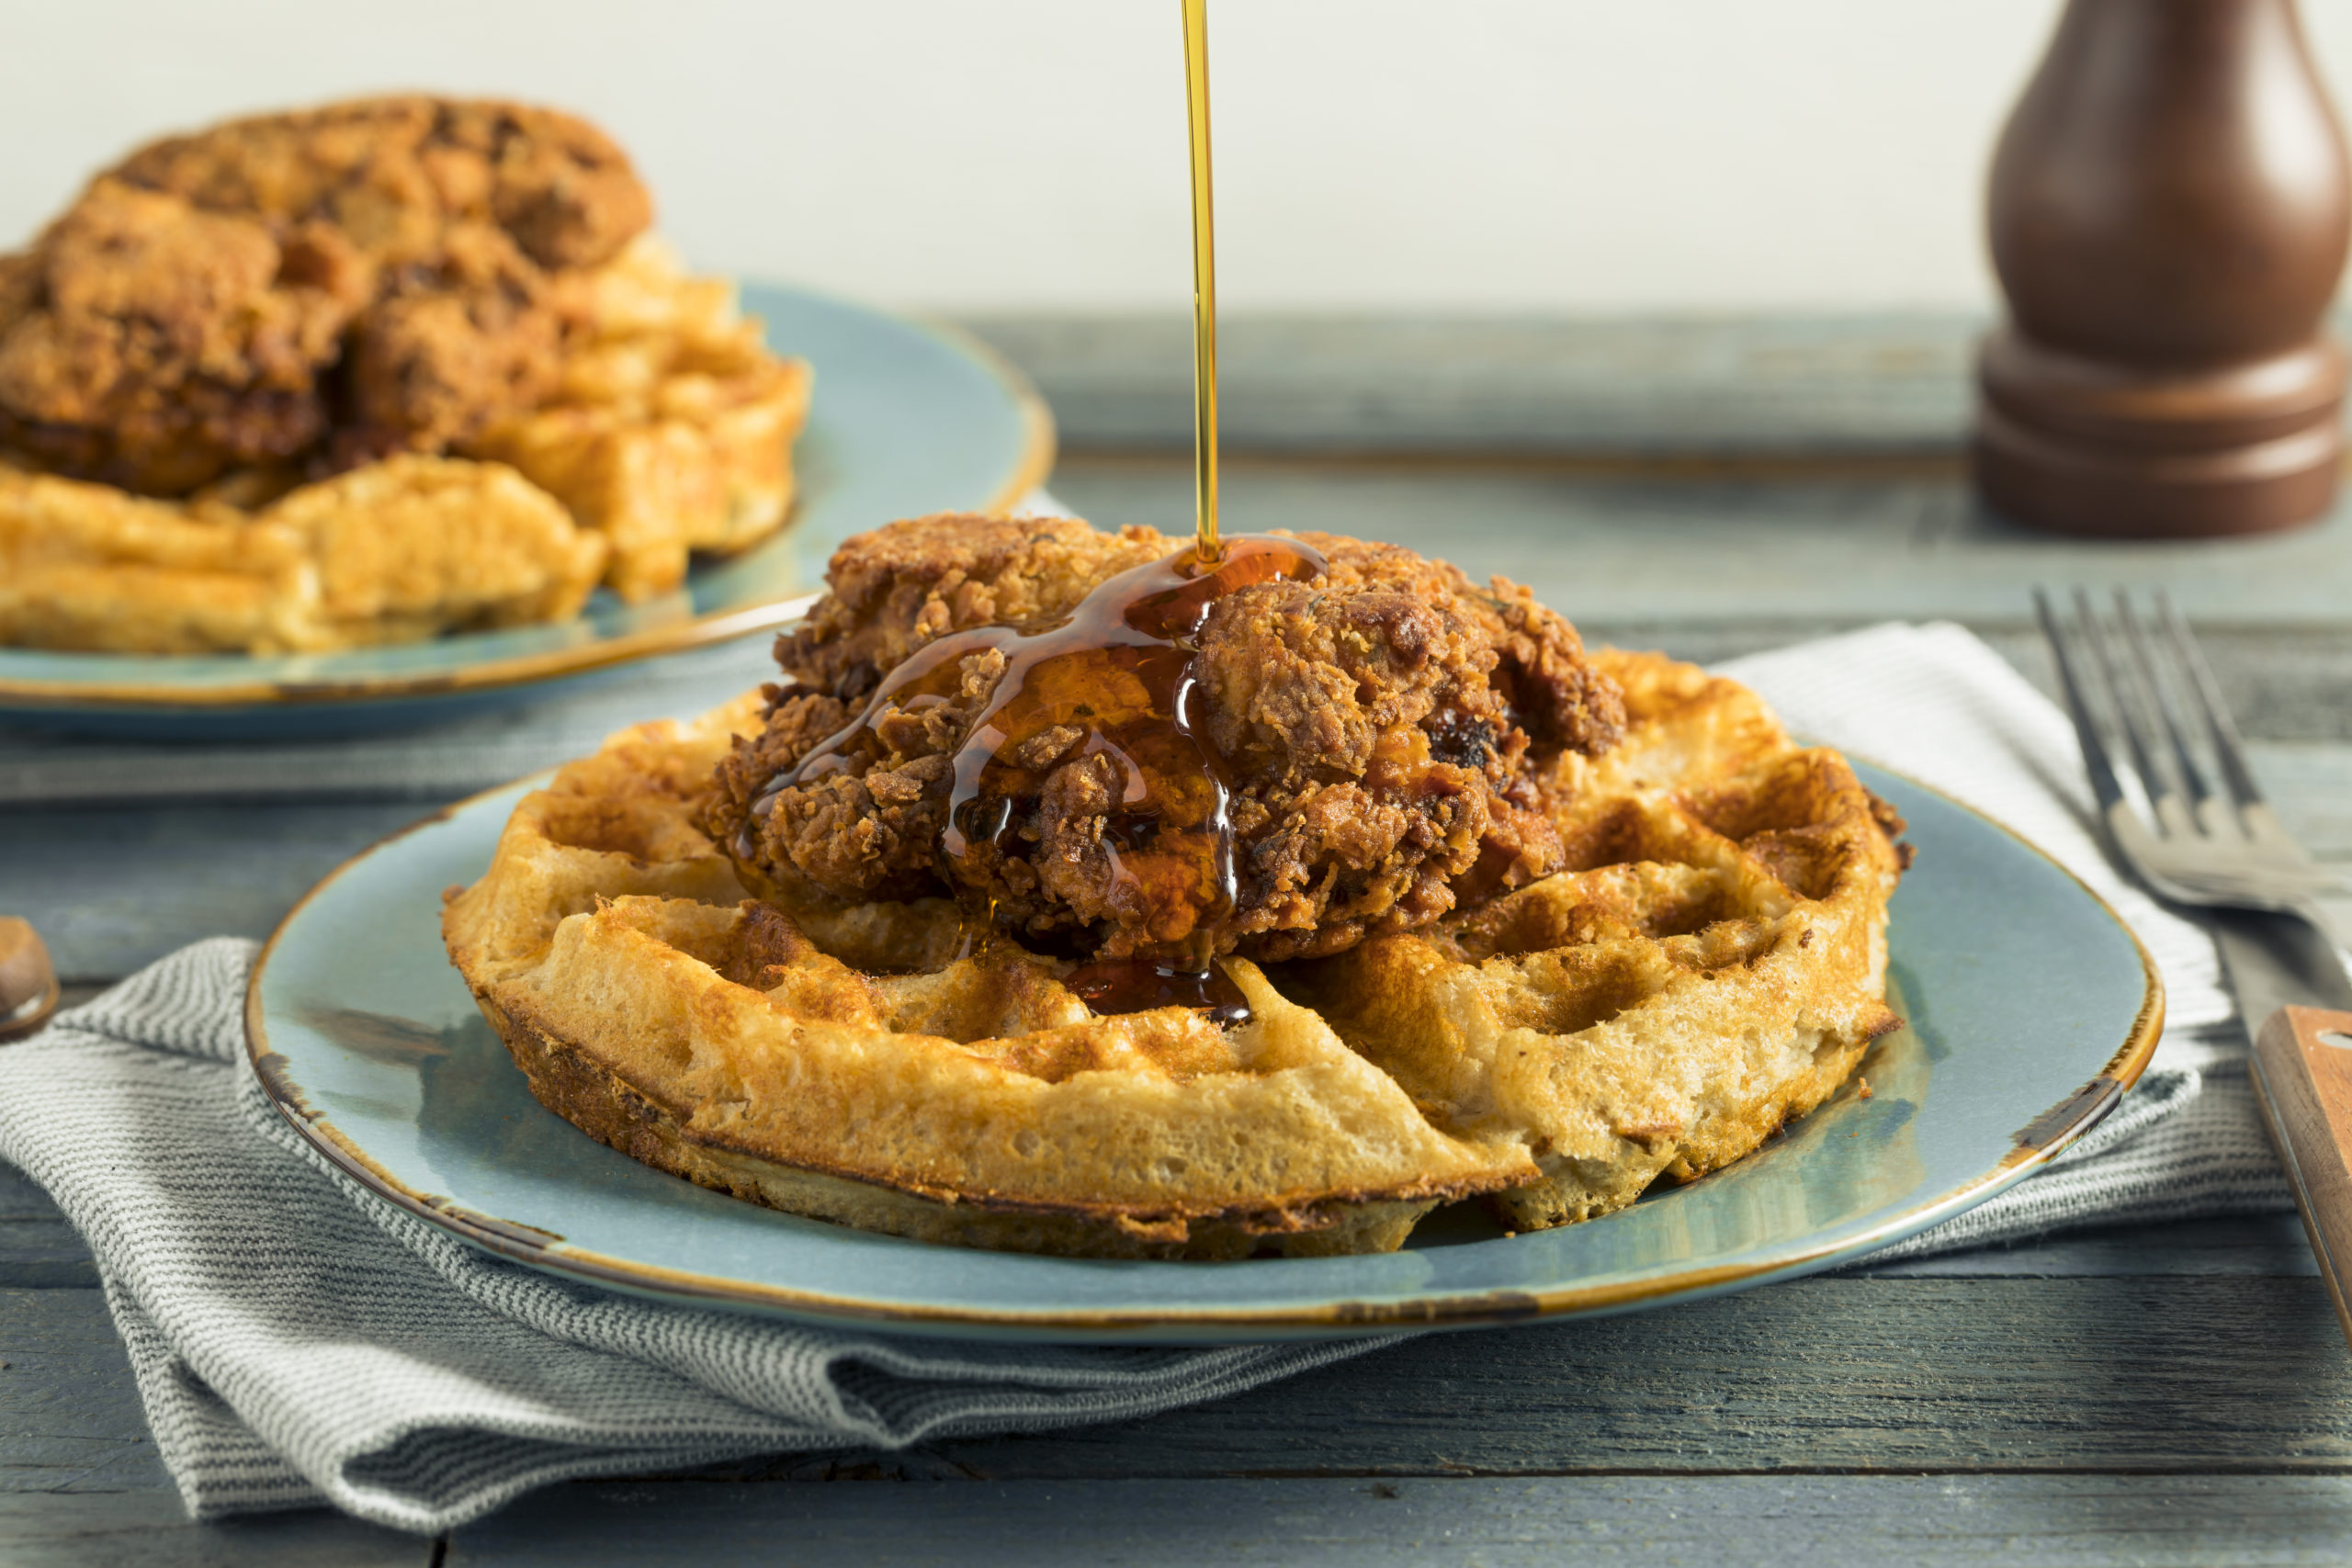 Homemade Southern Chicken and Waffles